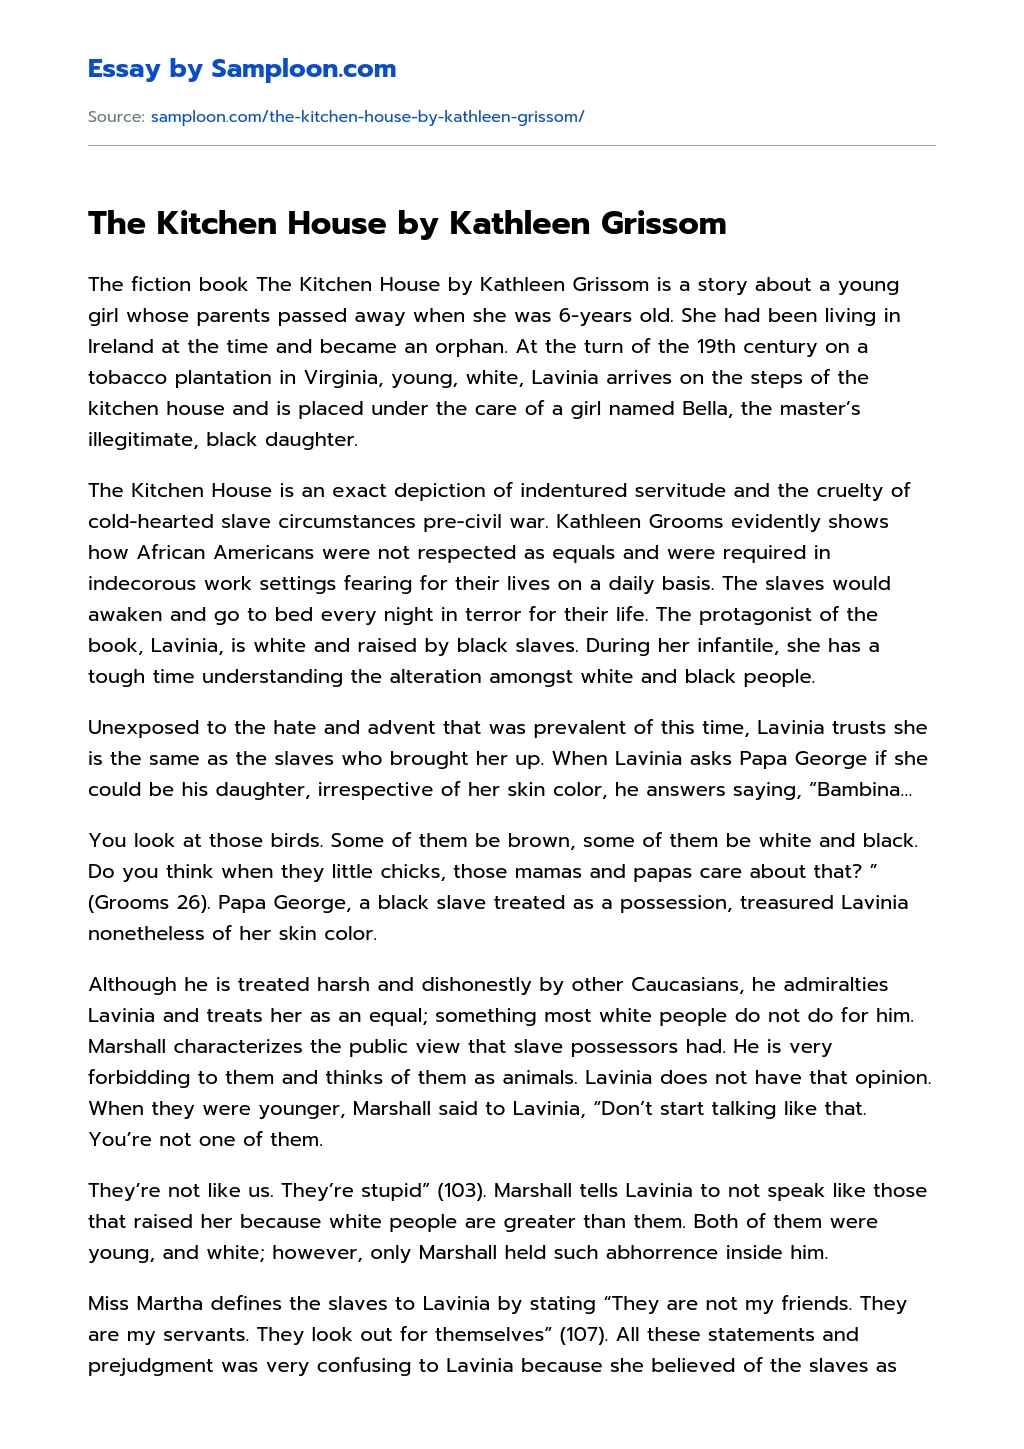 The Kitchen House by Kathleen Grissom essay